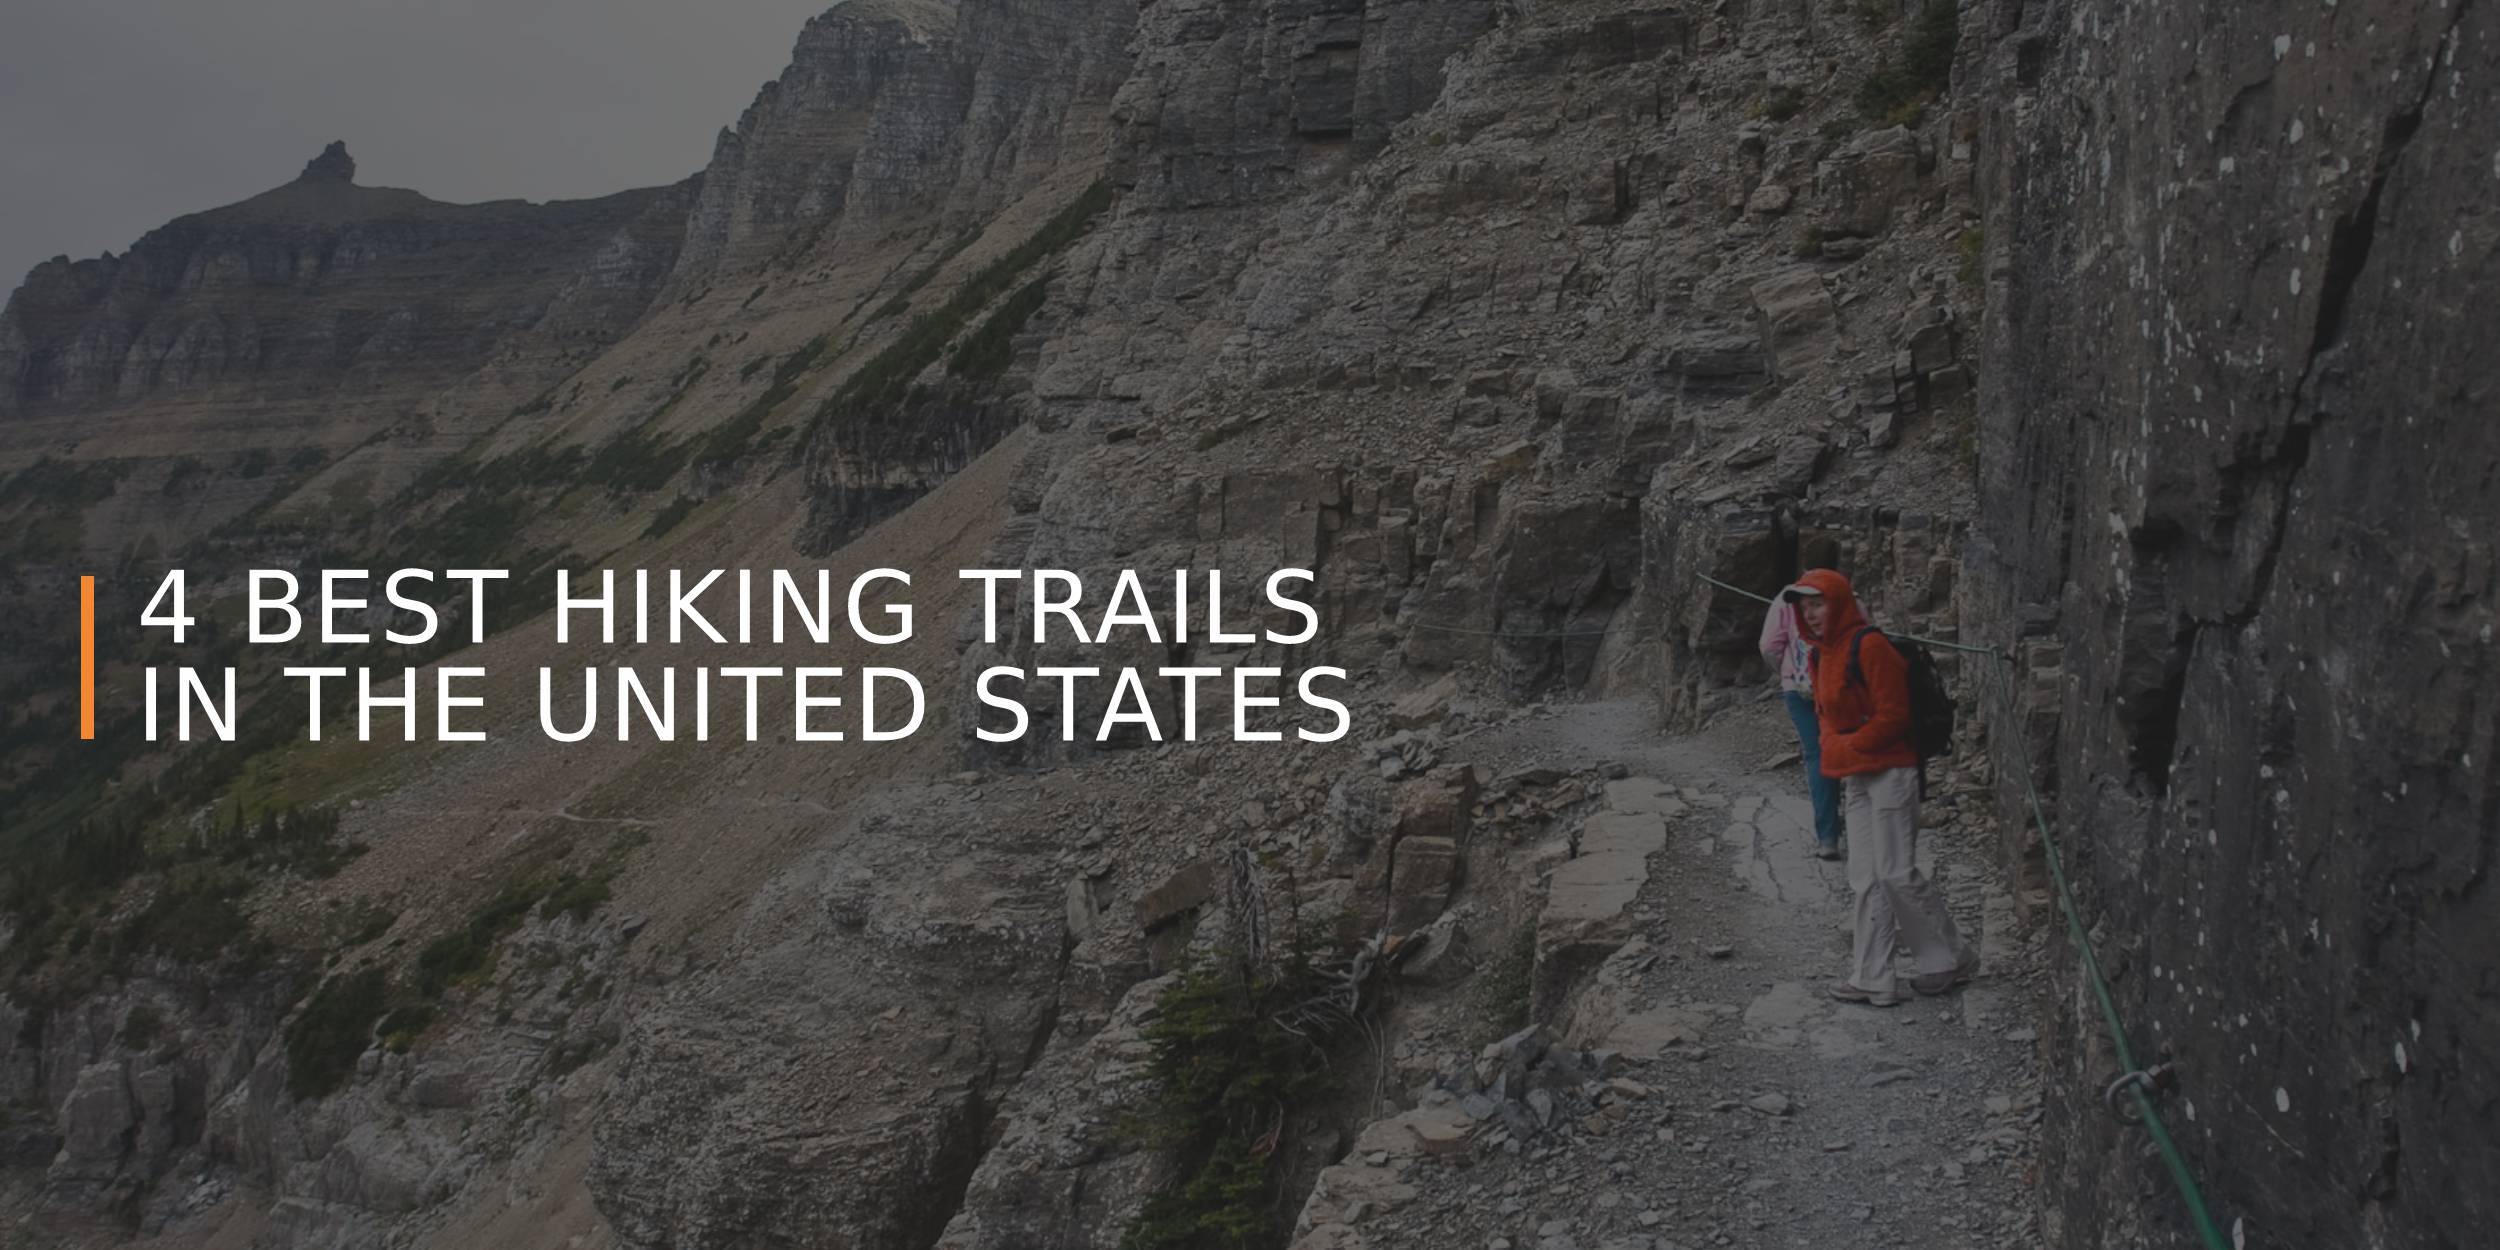 4 Best Hiking Trails in the United States